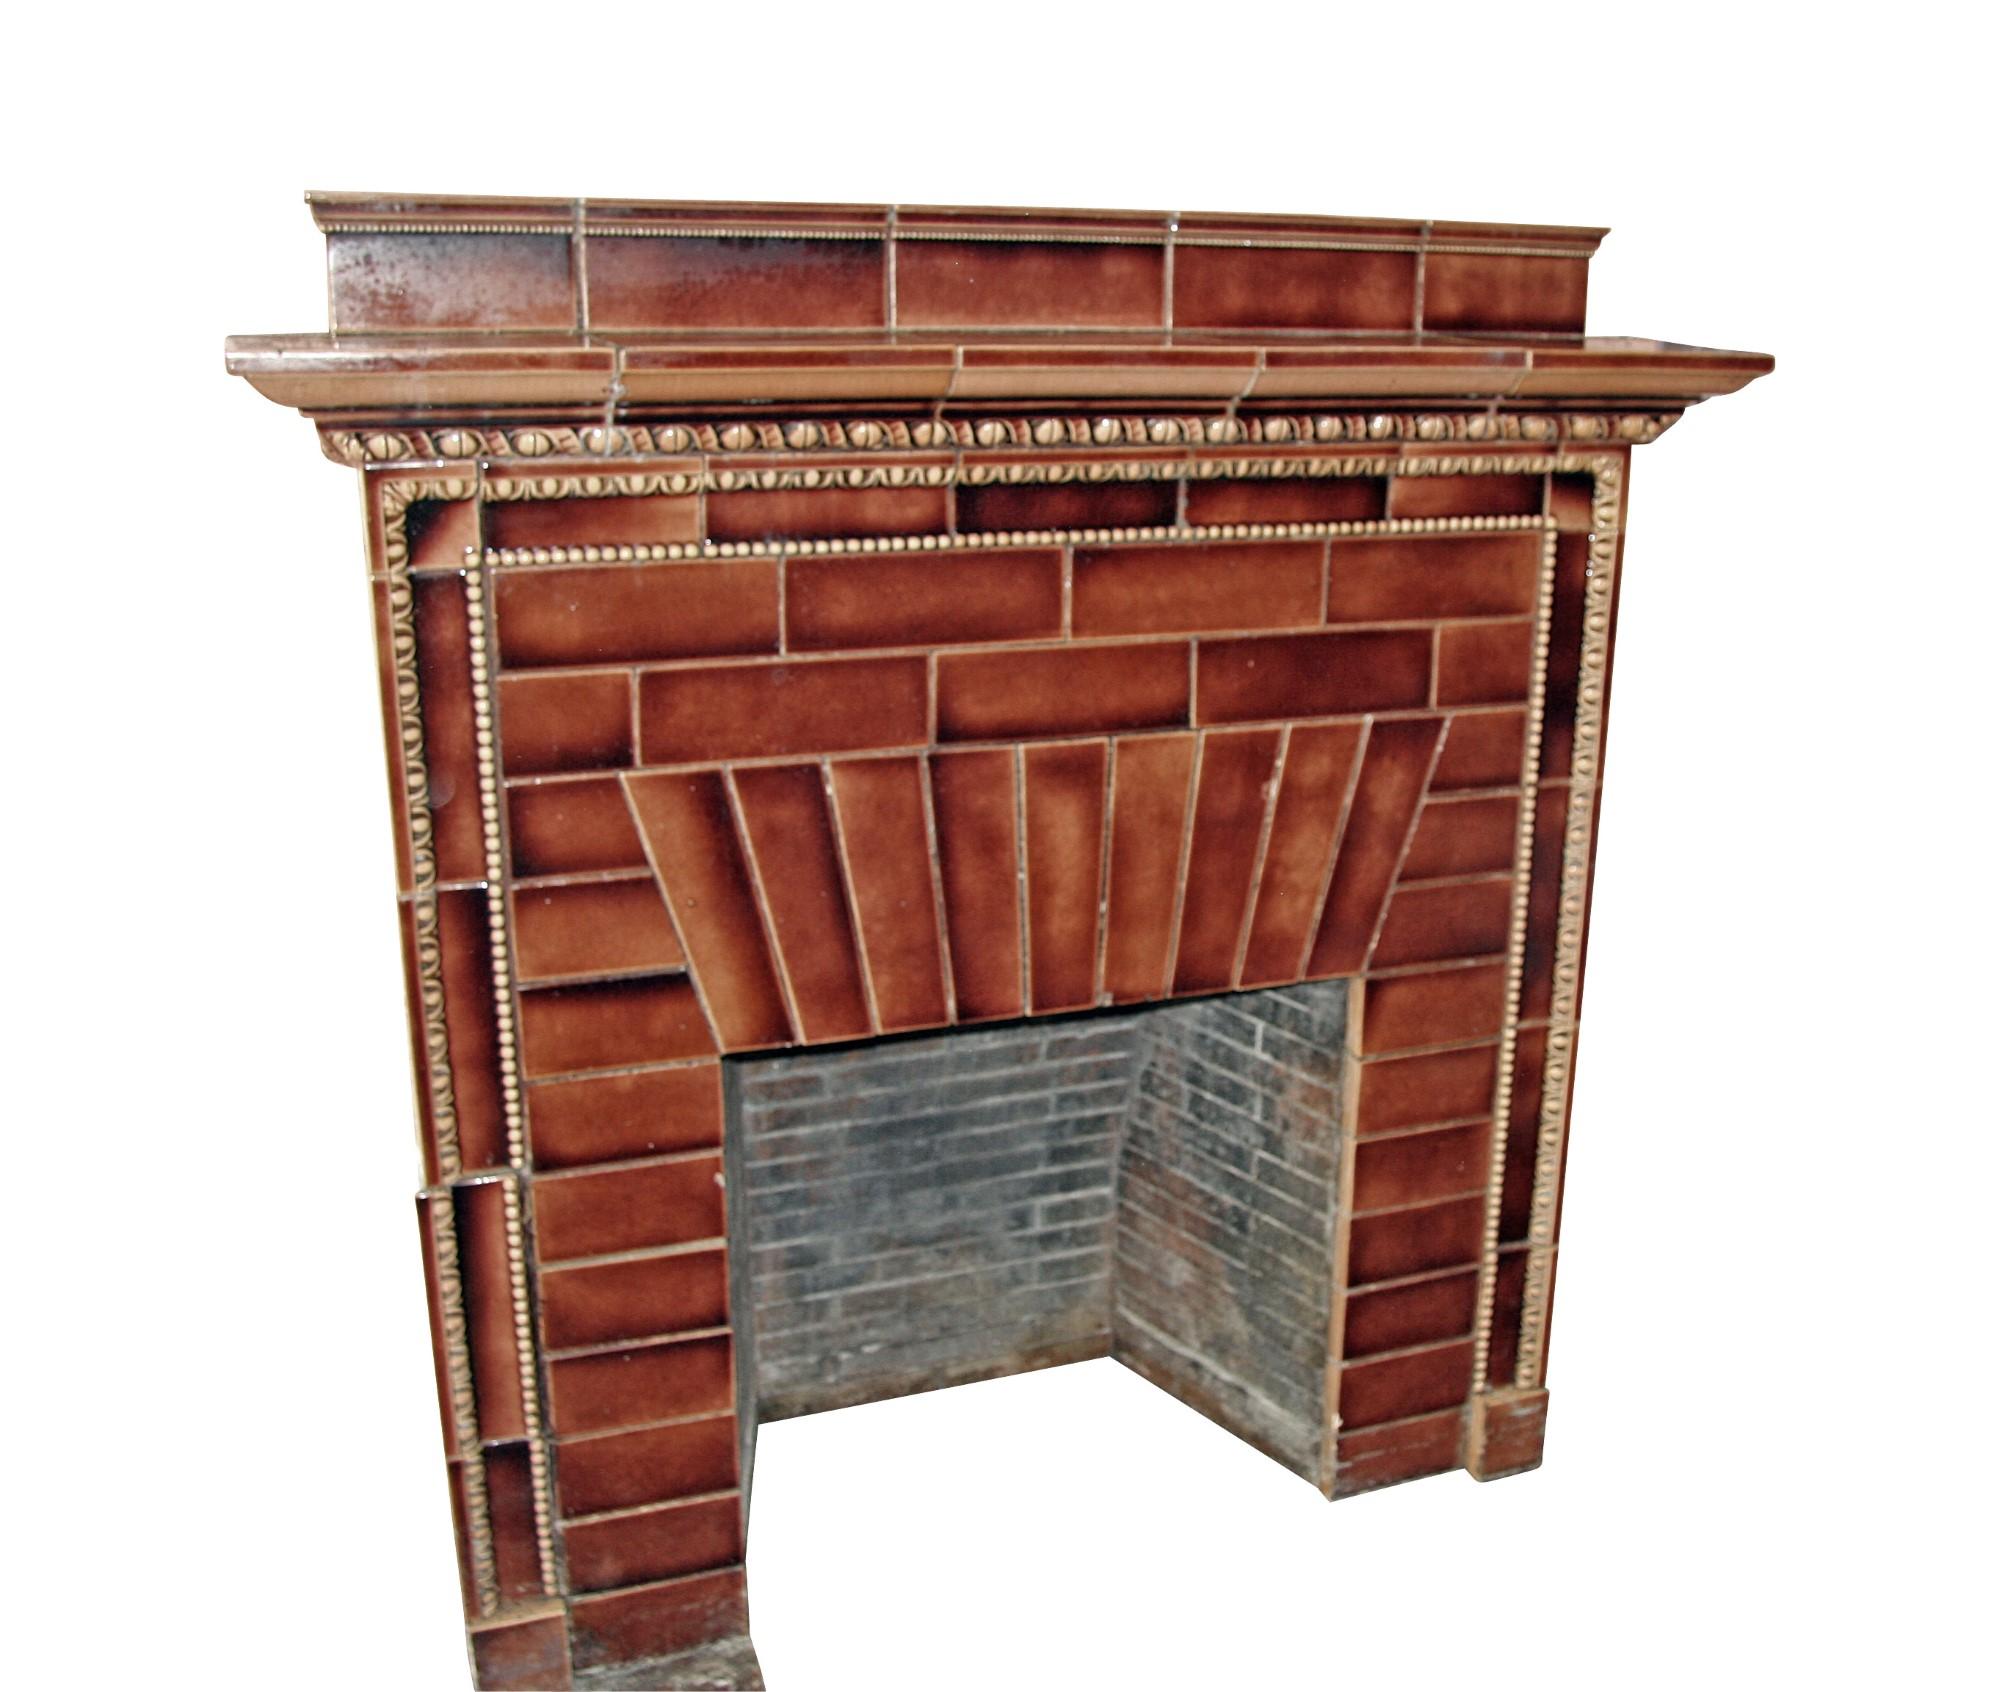 Ceramic Mantel from the Iver Johnson Building, Fitchburg, MA 2